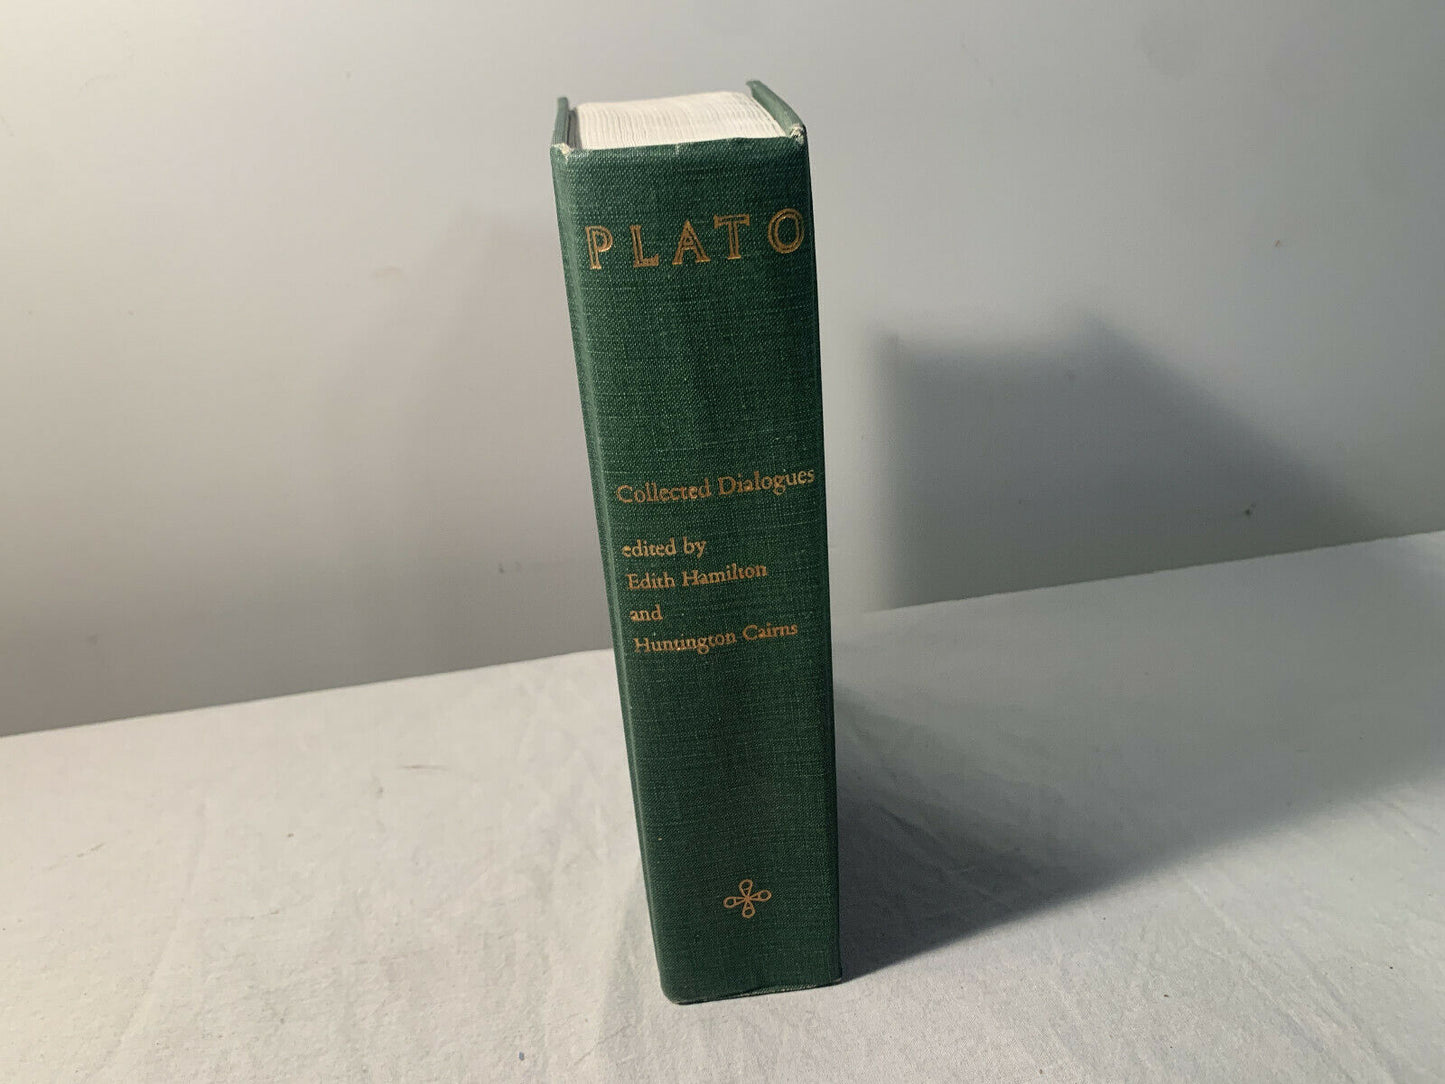 The Collected Dialogues of Plato Including the Letters  [1961 · 9th Printing]